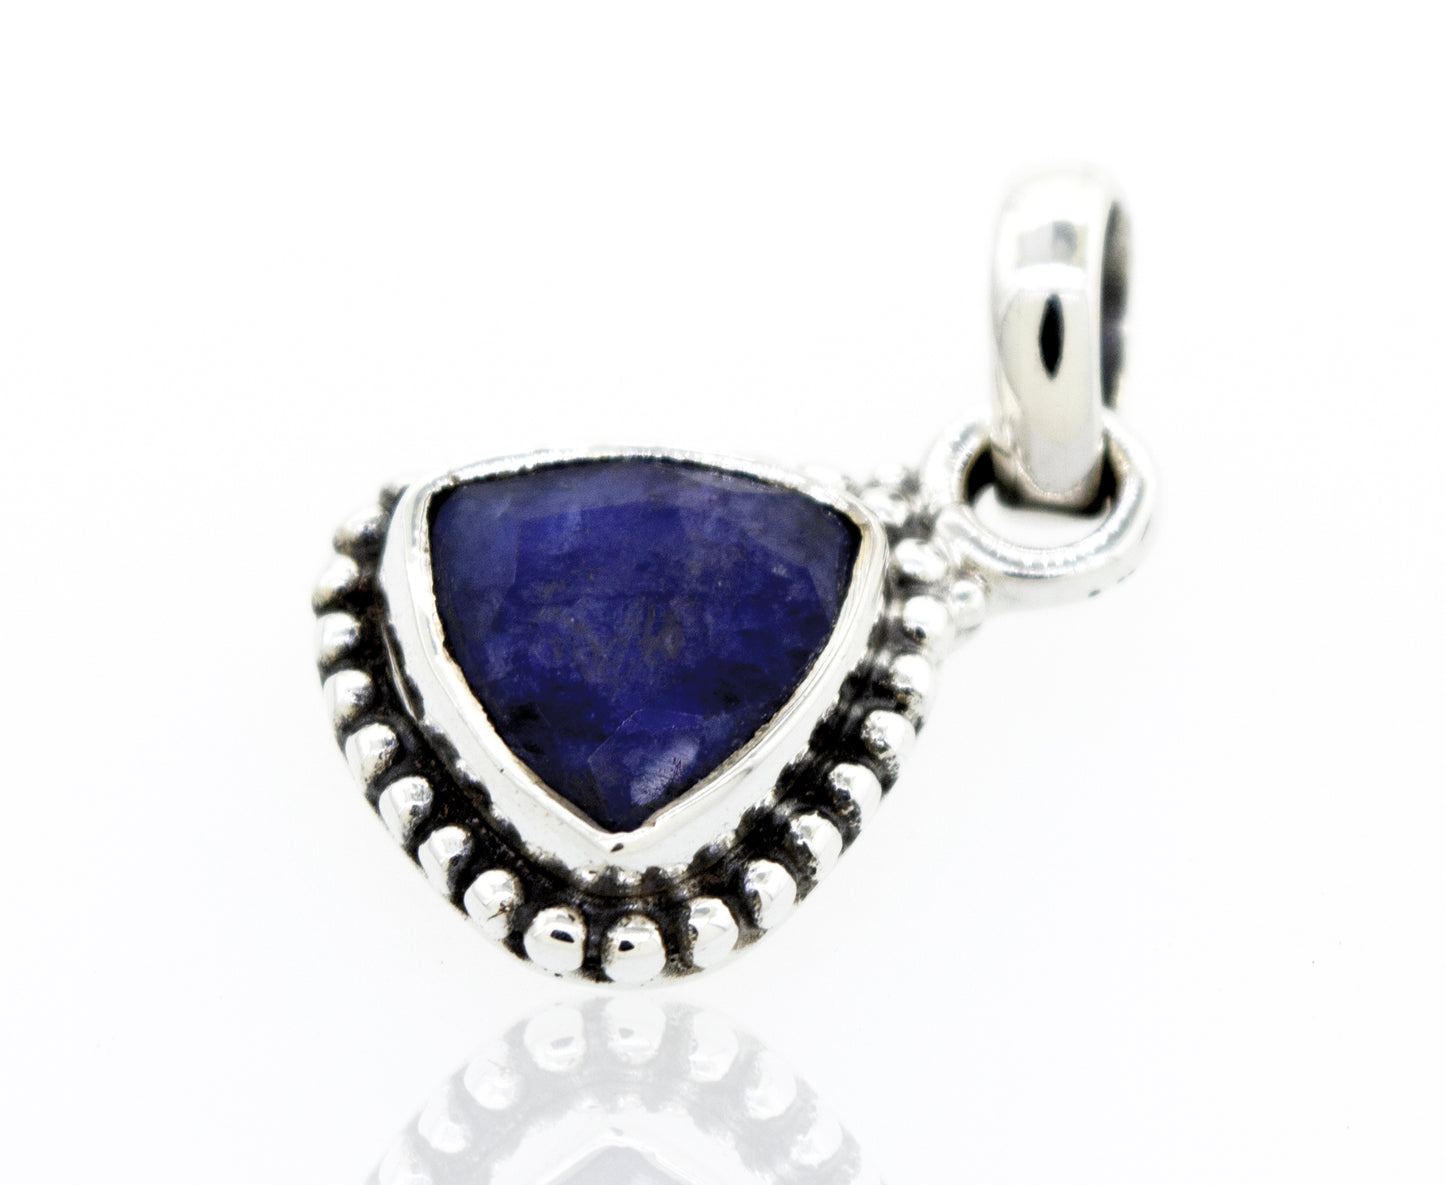 A Beautiful Triangular Shape Sapphire Pendant With Beads Design by Super Silver, with a lapis stone in a silver setting.